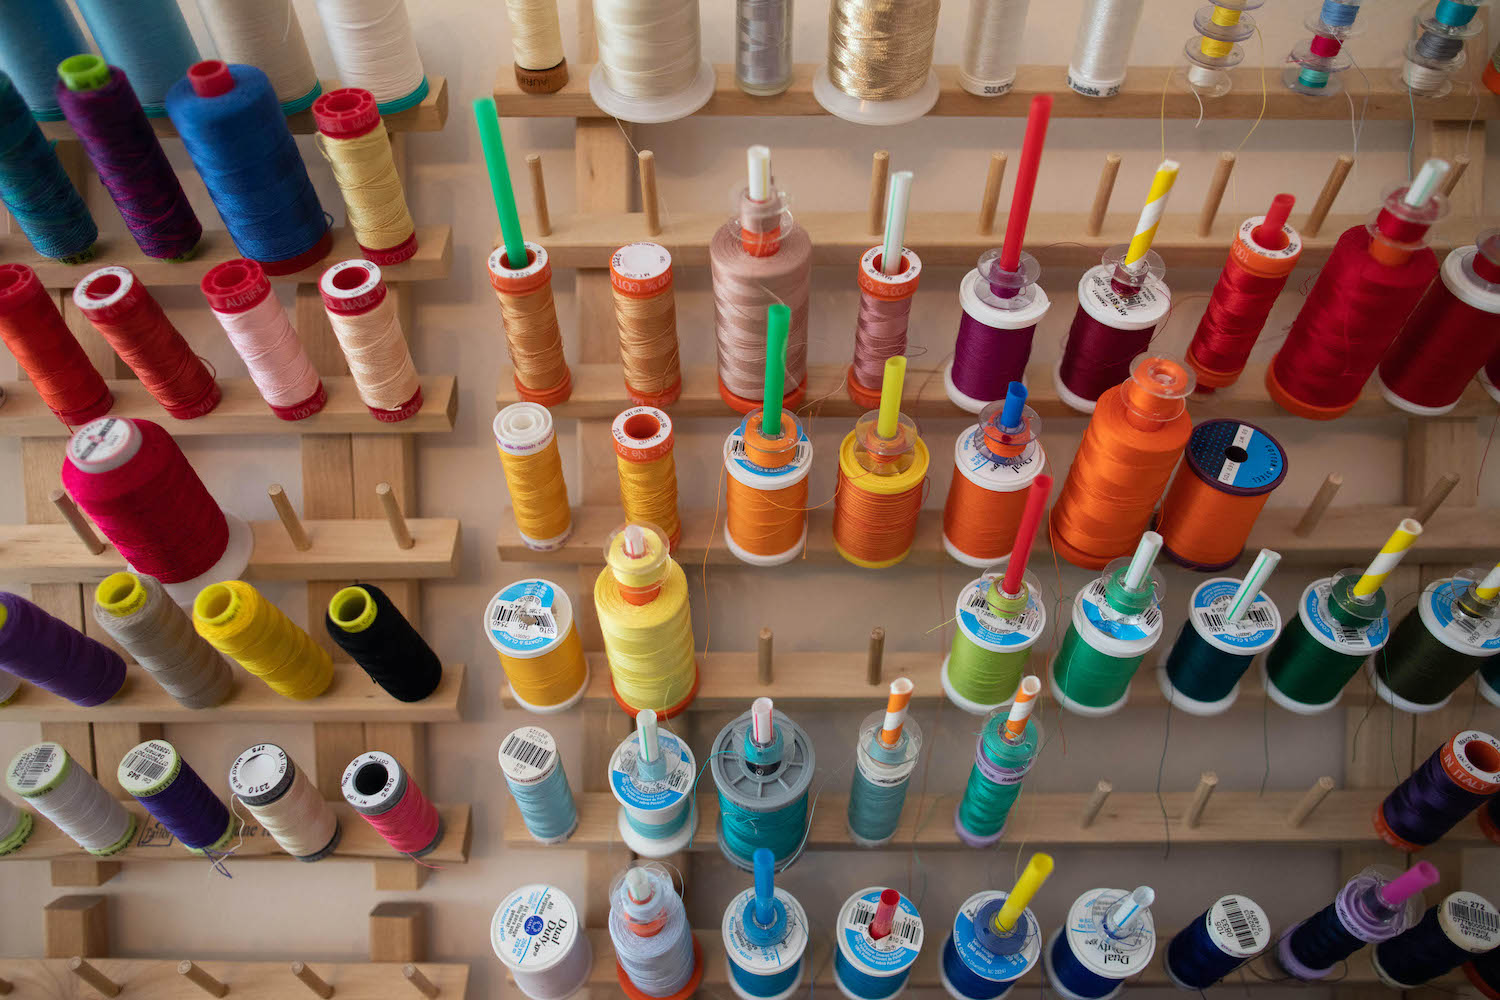 dozens of spools of thread hang on a wall rack in rainbow order